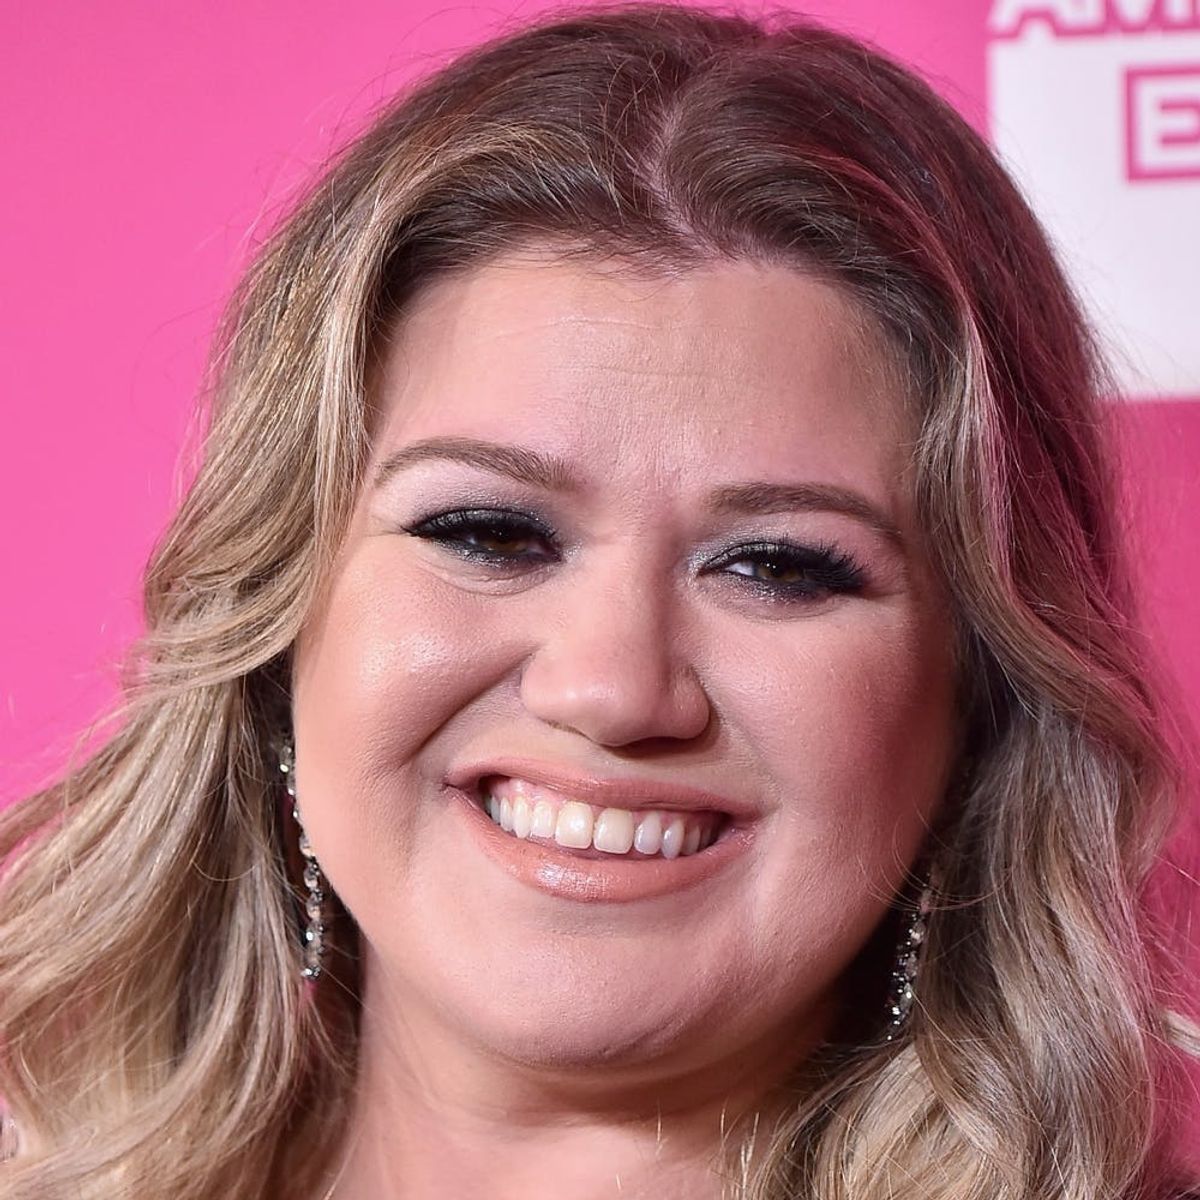 Kelly Clarkson Hit the Red Carpet One Day After Her Home Was Burglarized